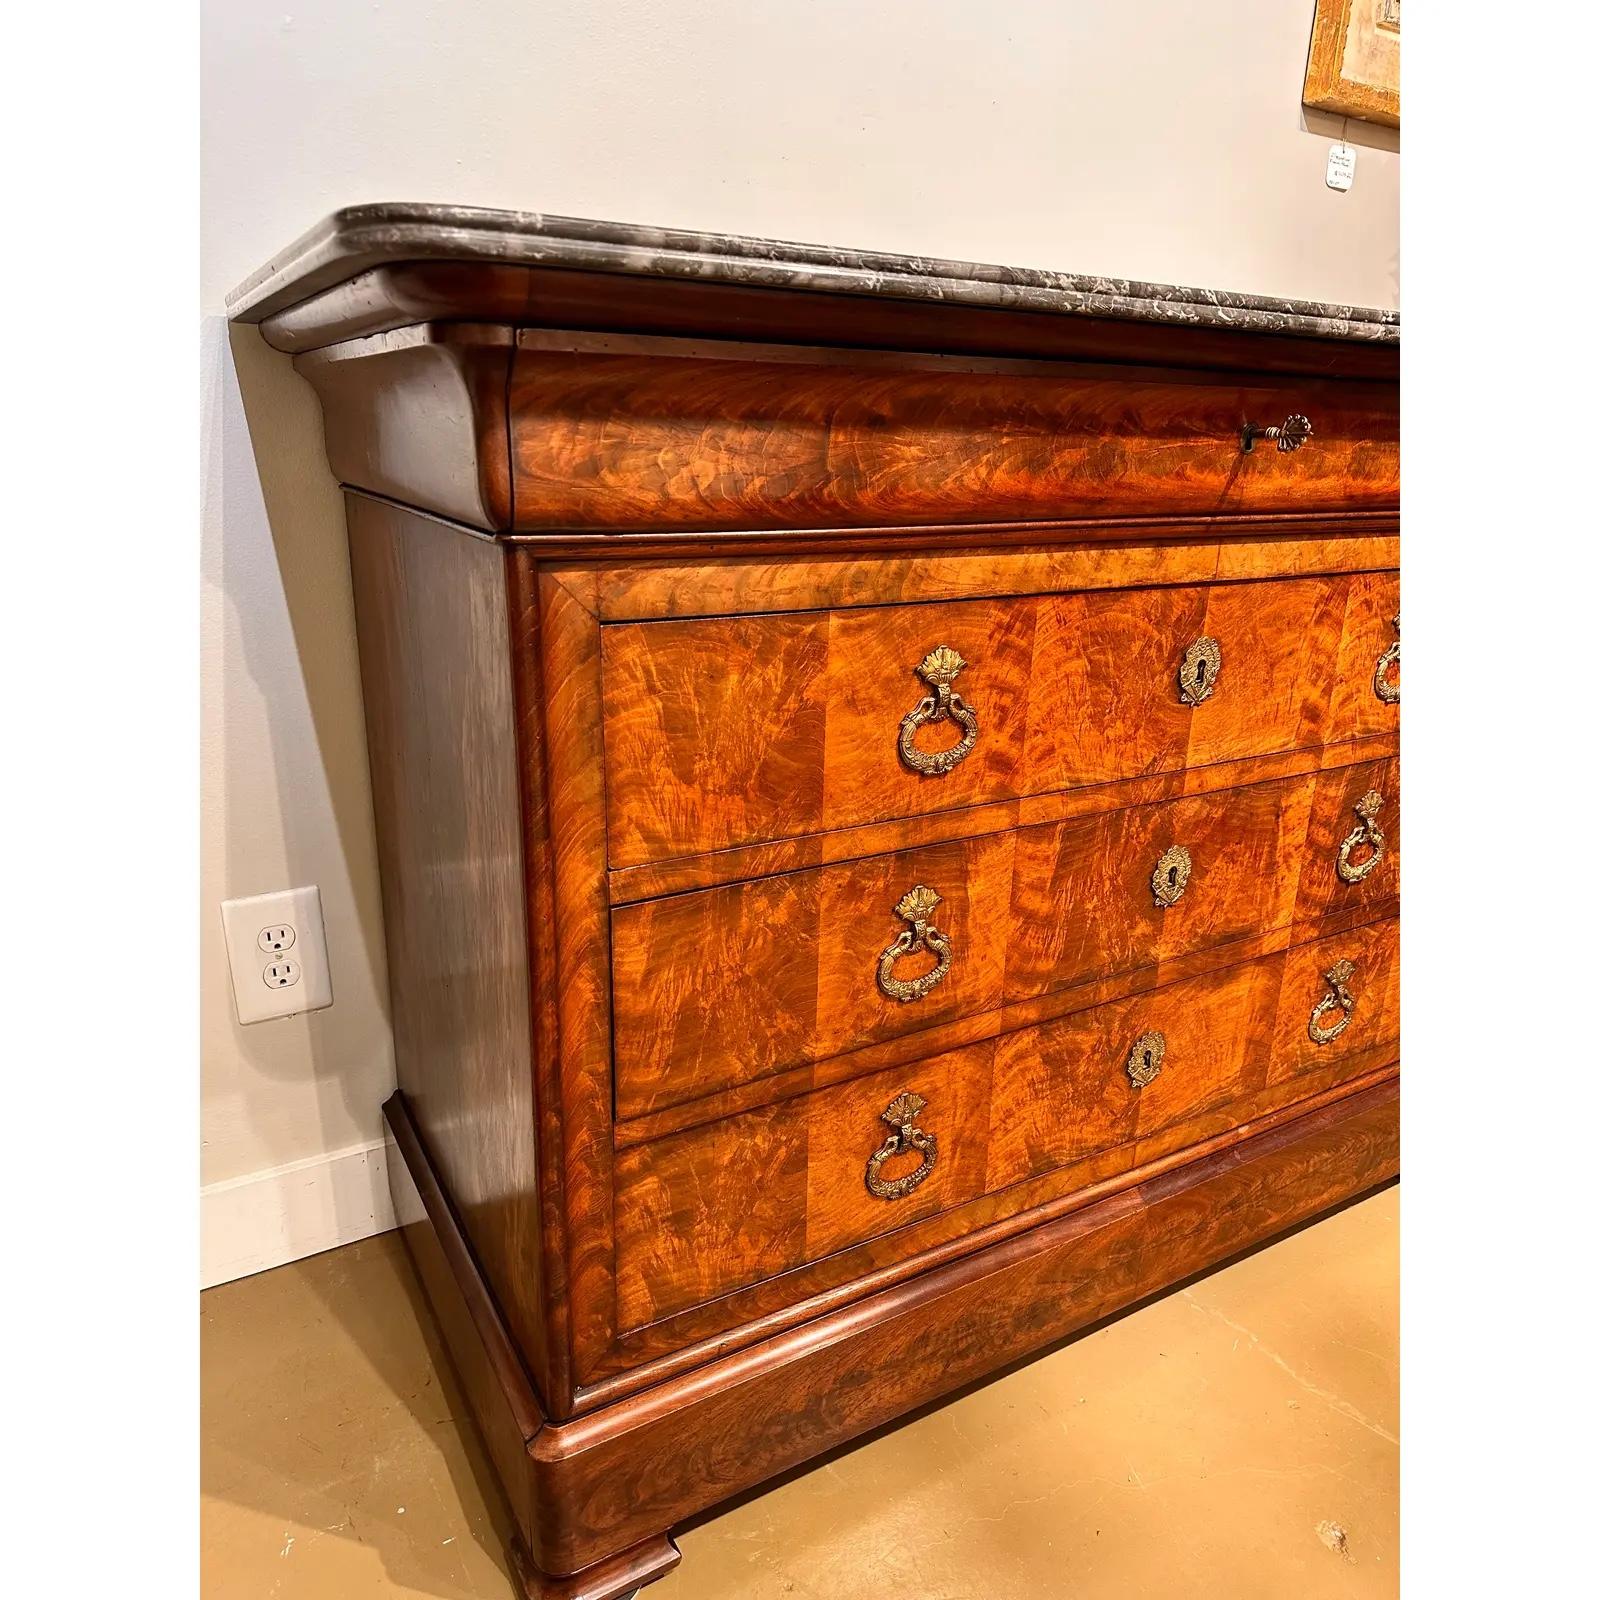 This magnificent French chest is the epitome of everything the Louis Philippe style stands for! The front is a show stopping portrayal of burled wood and skilled craftsmanship. Clean and even lines, with smooth sliding drawers. The ornate brass